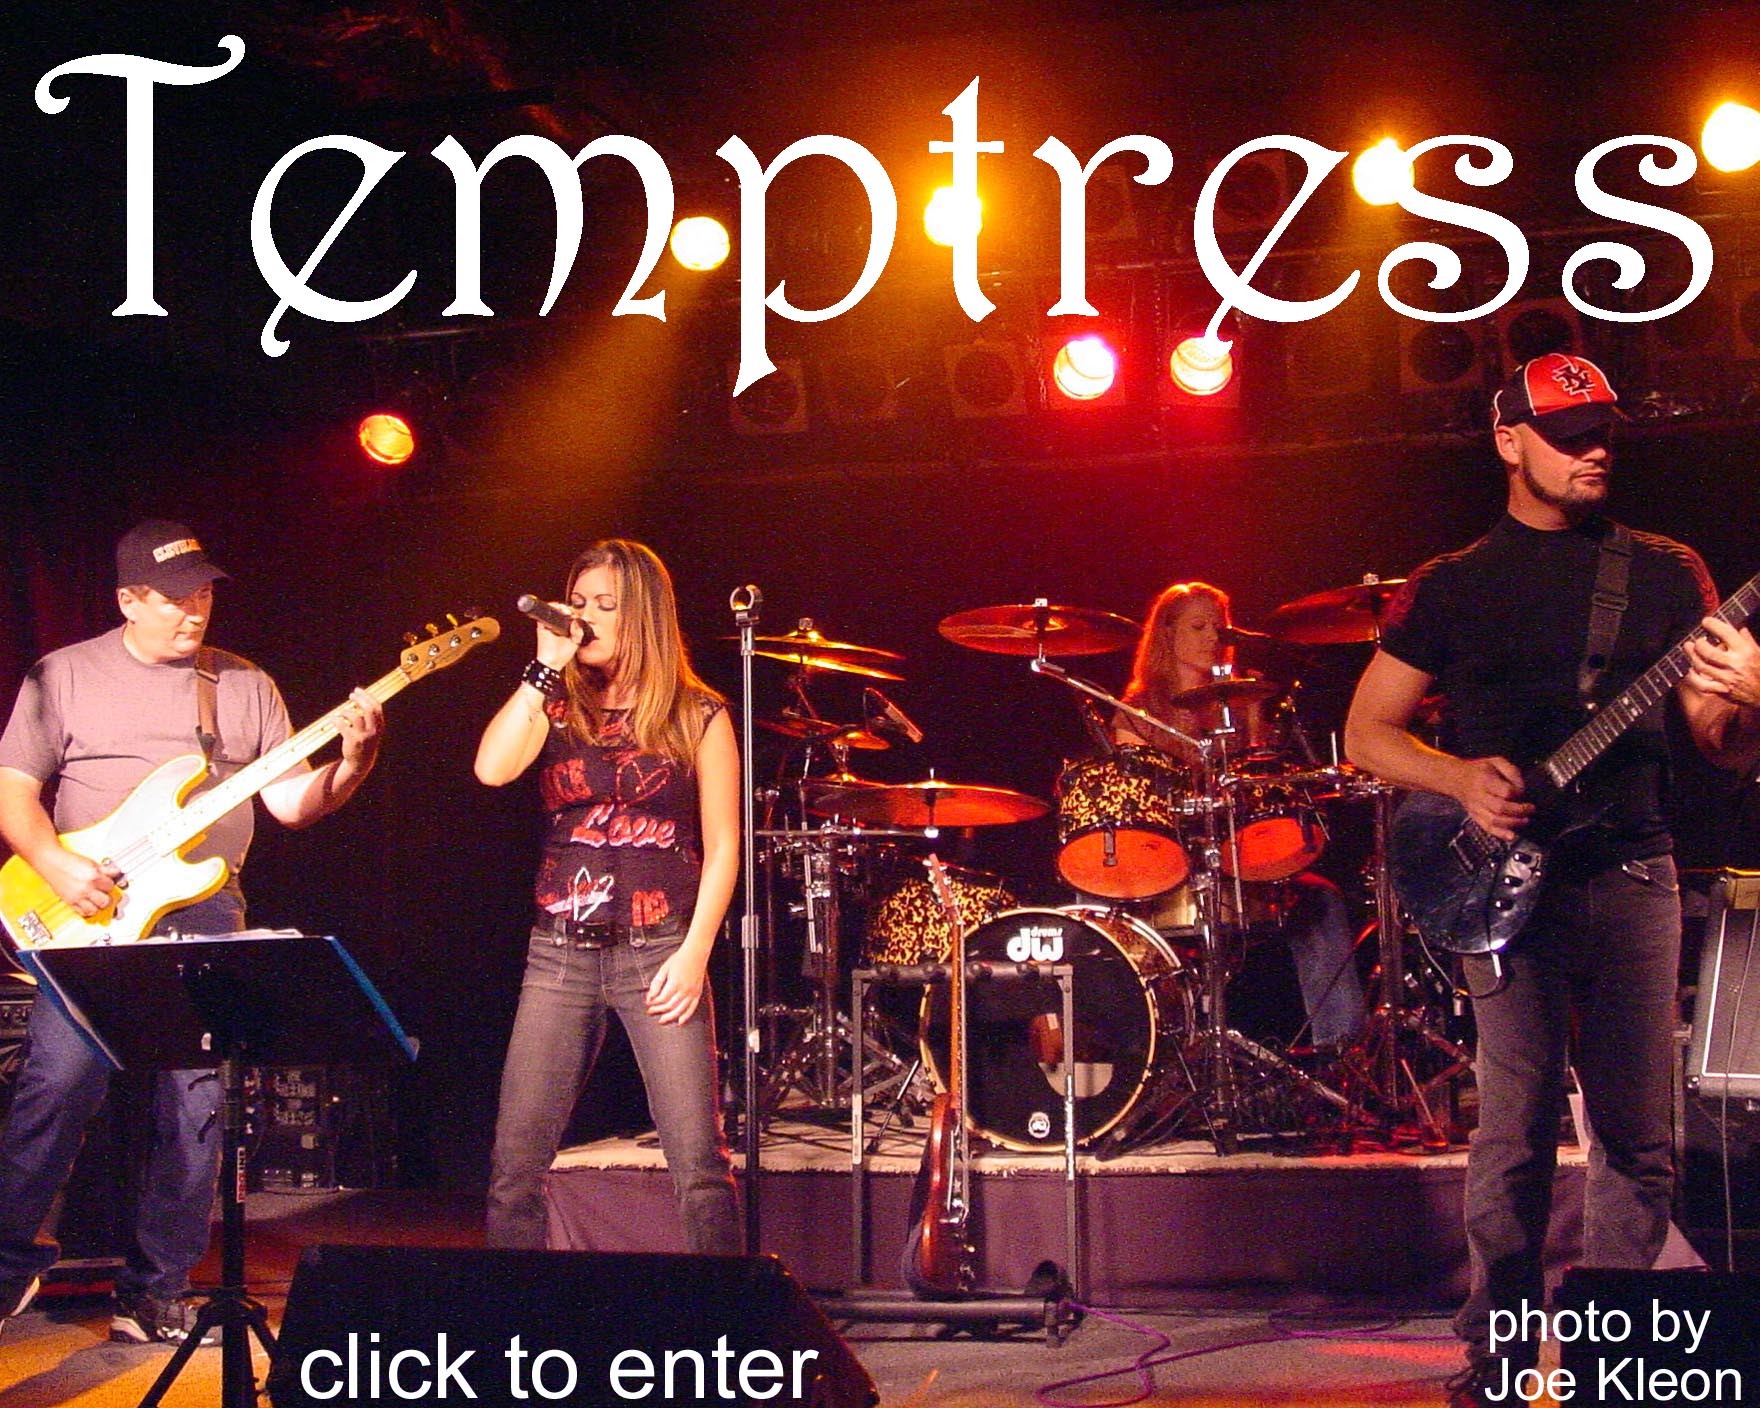 Welcome to the Temptress Home Page!  Click to enter!